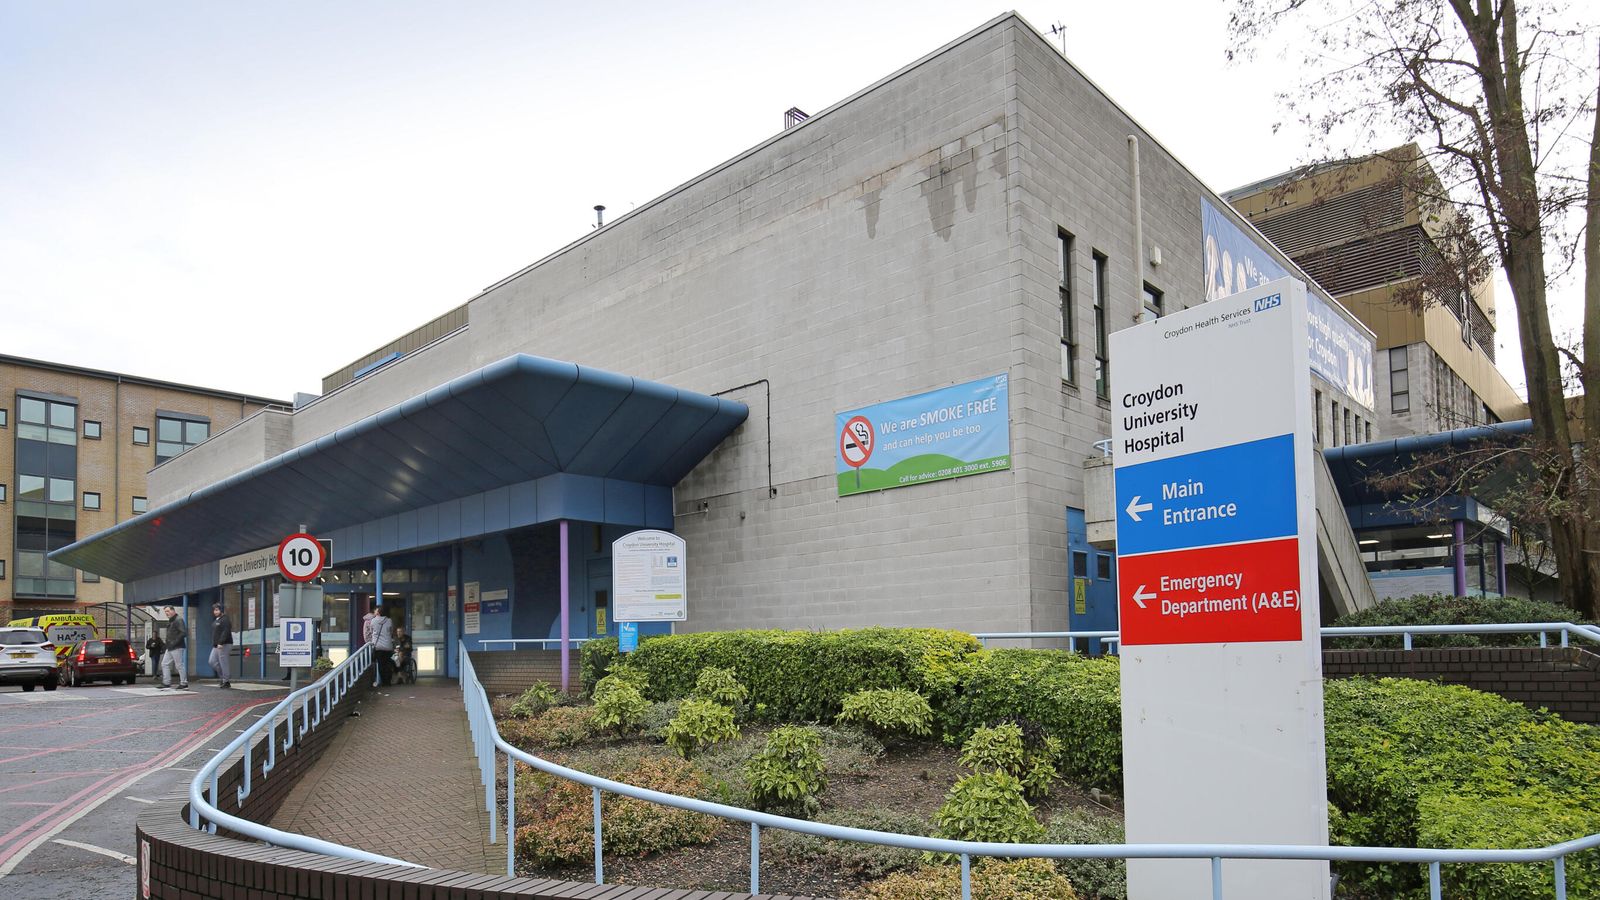 London hospital partially locked down after woman swallows poison